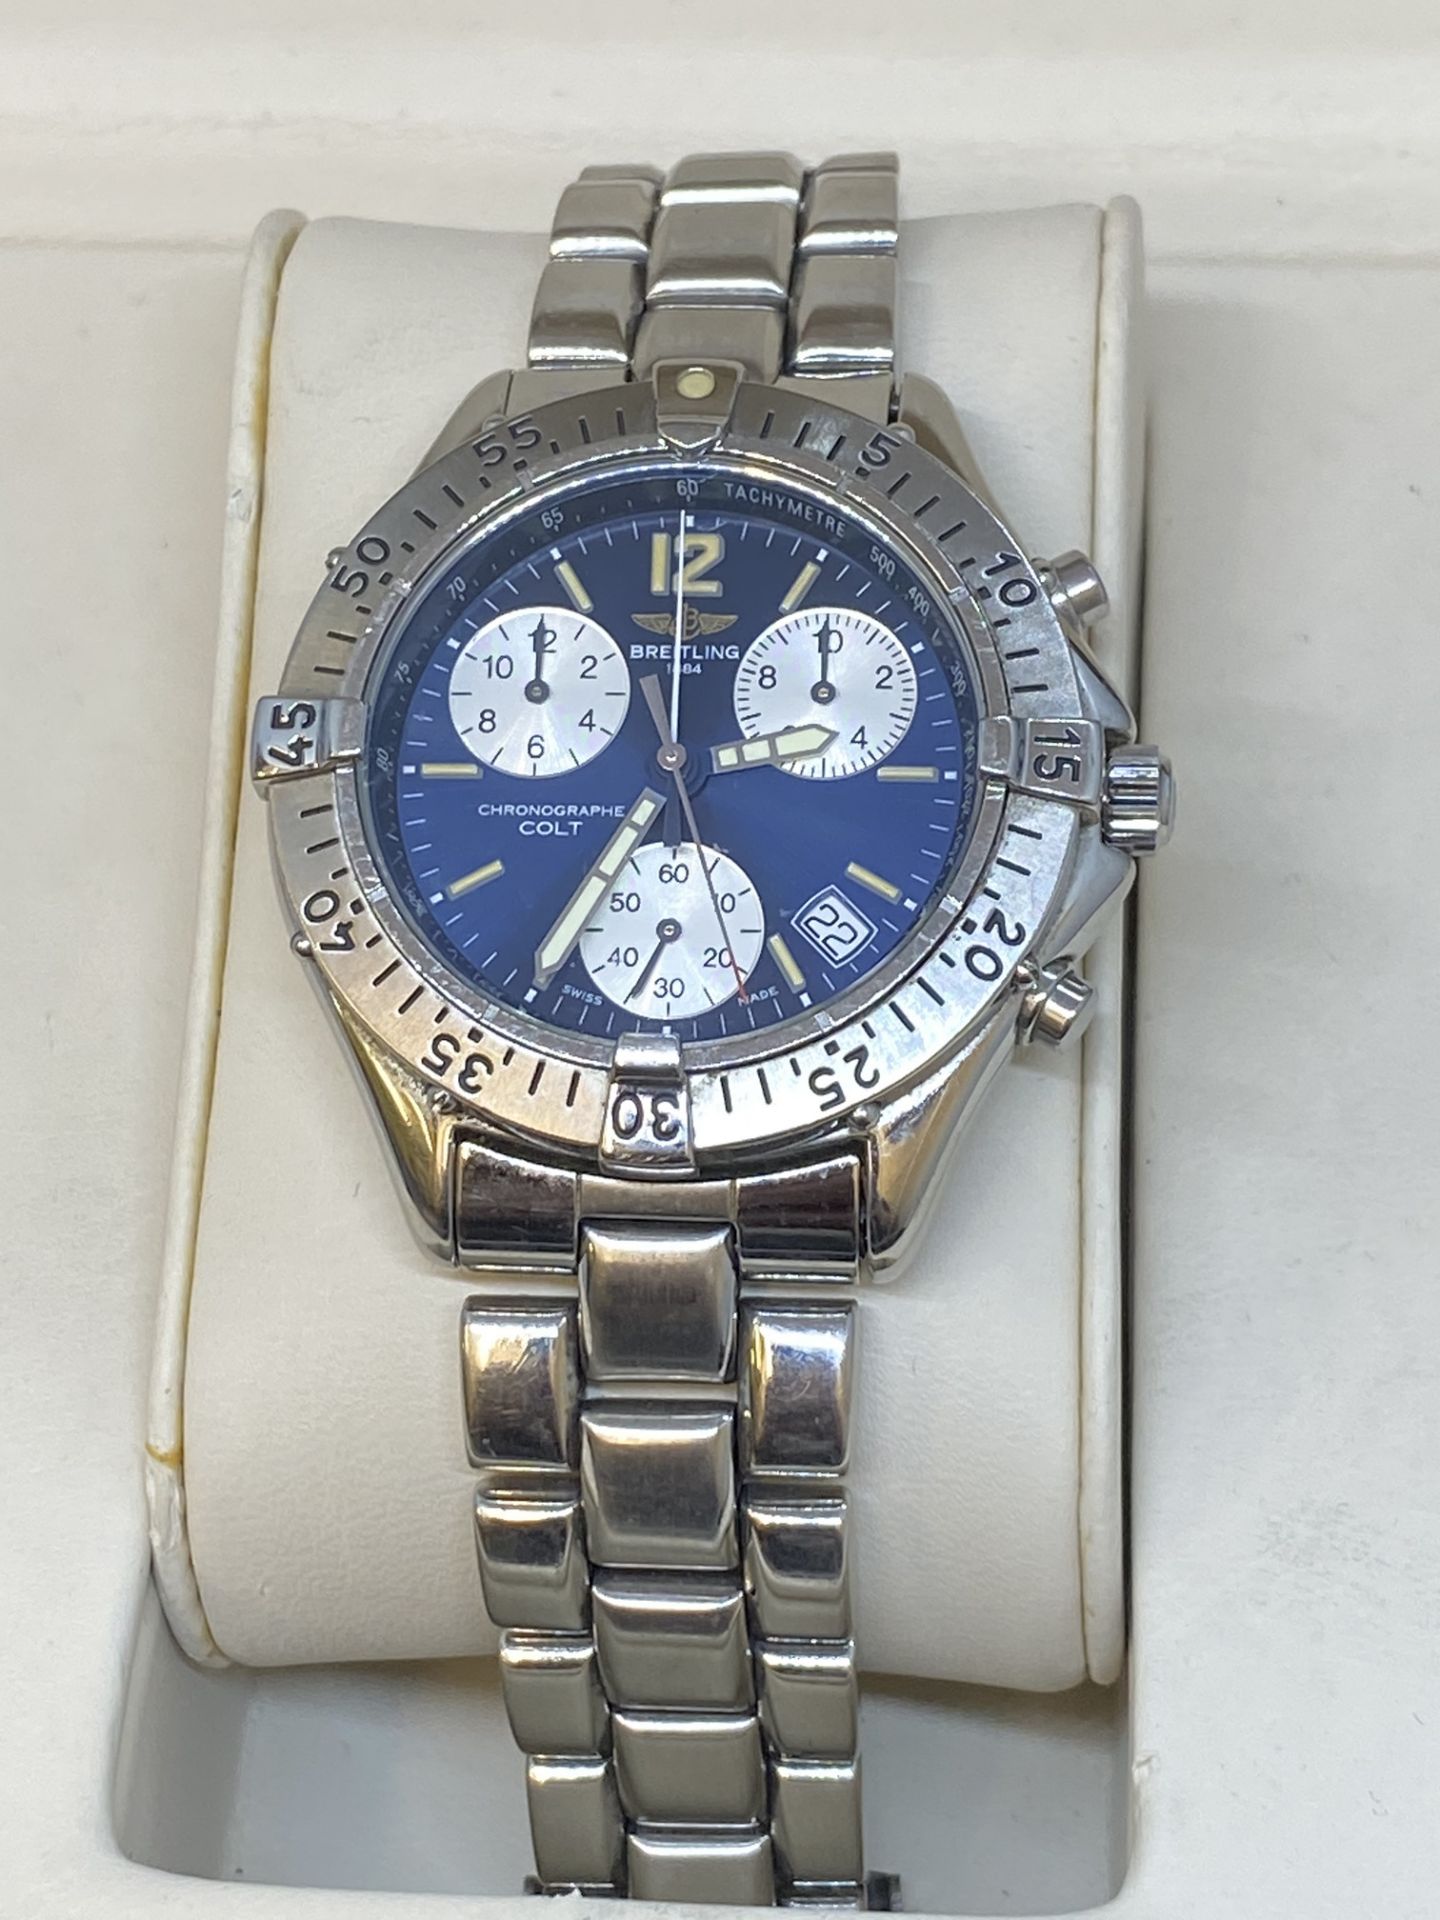 BREITLING CHRONOGRAPH STAINLESS STEEL WATCH - Image 5 of 13